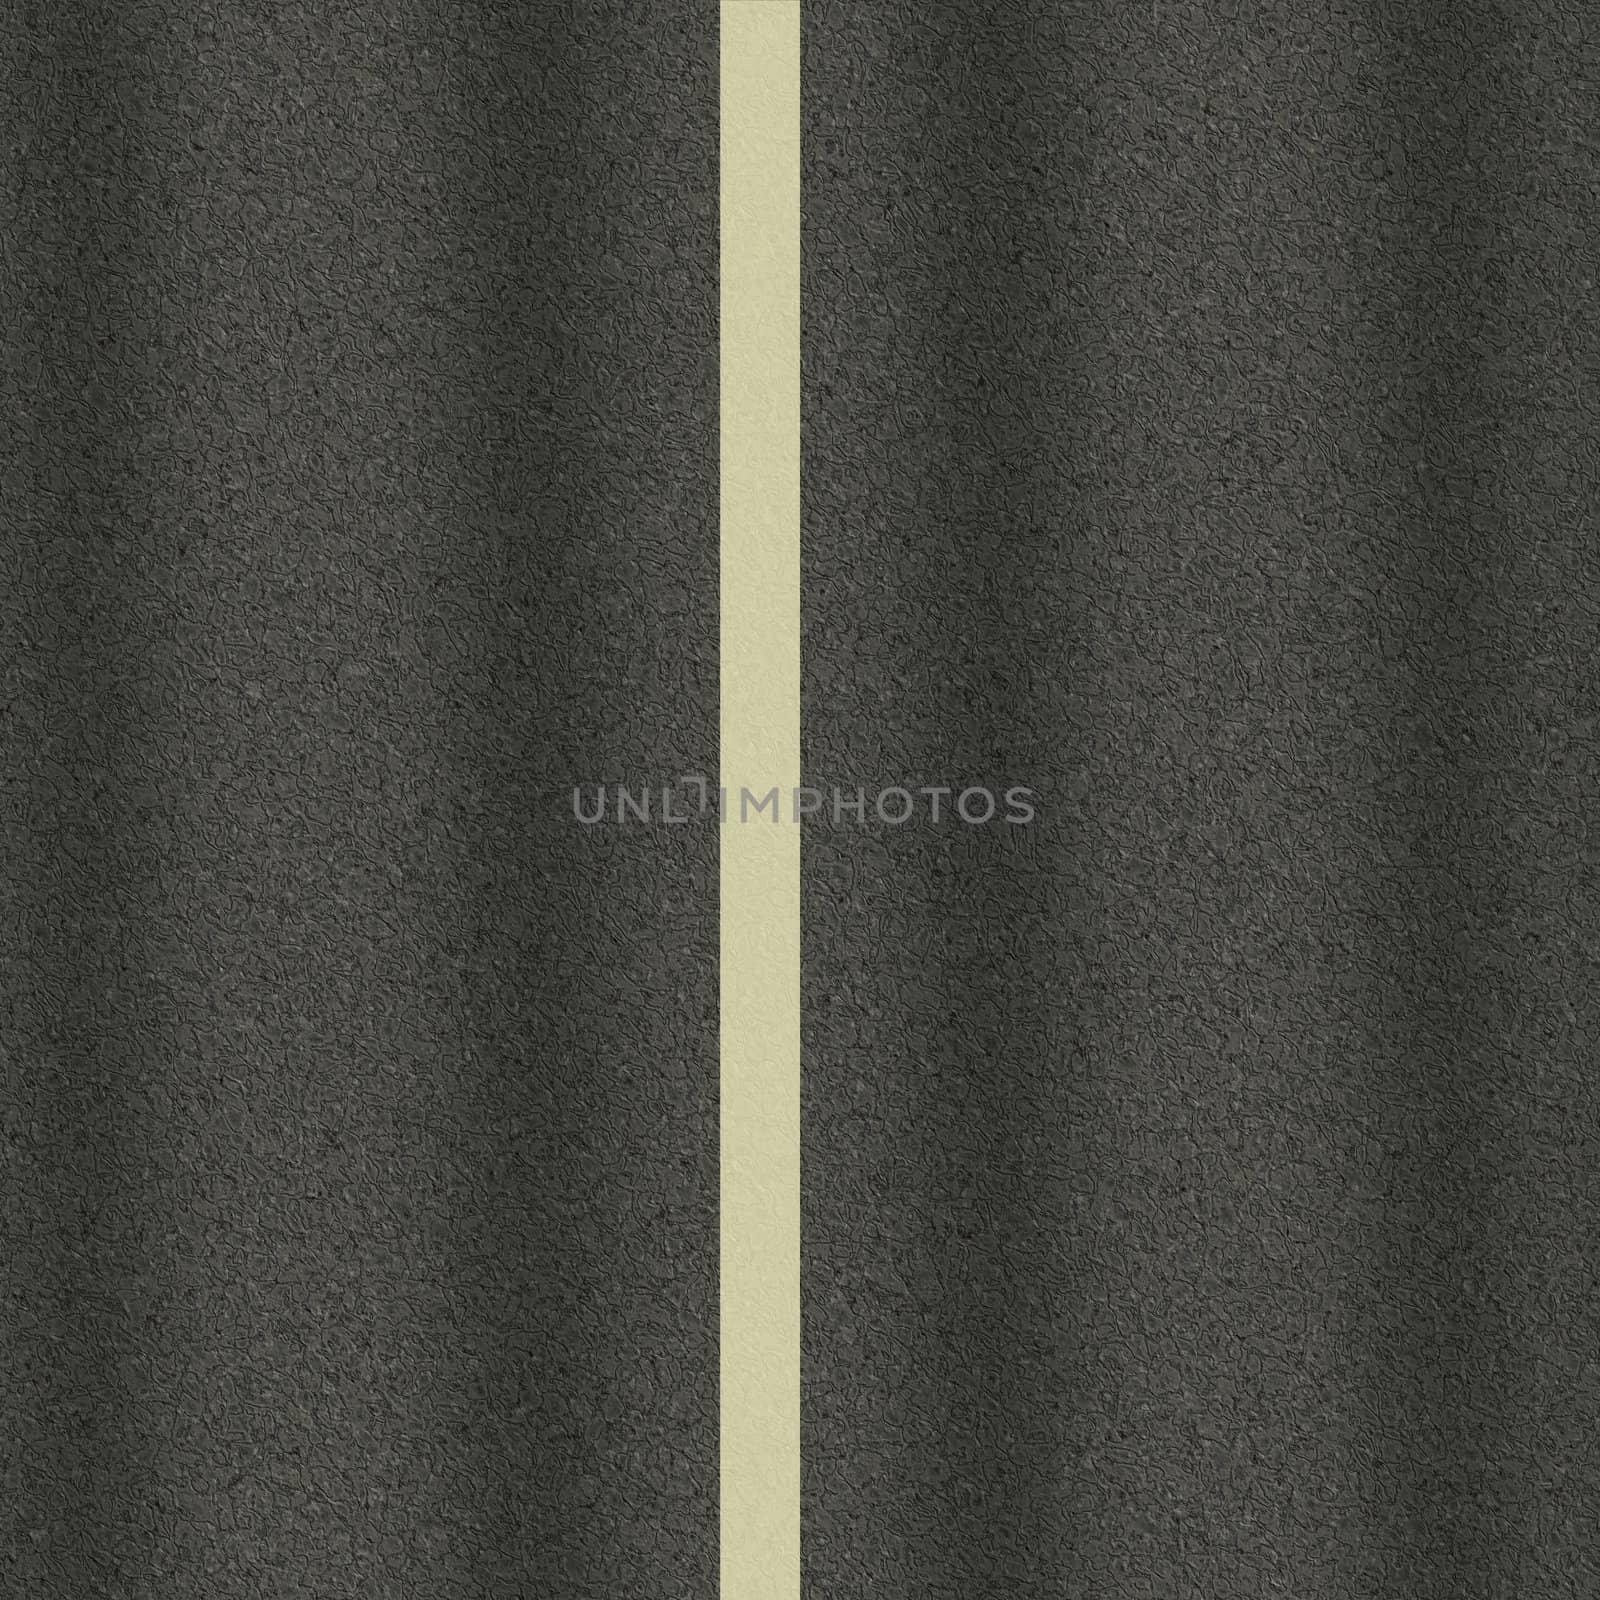 The texture road, road marking, asphalt, suits for duplication of the background, illustration